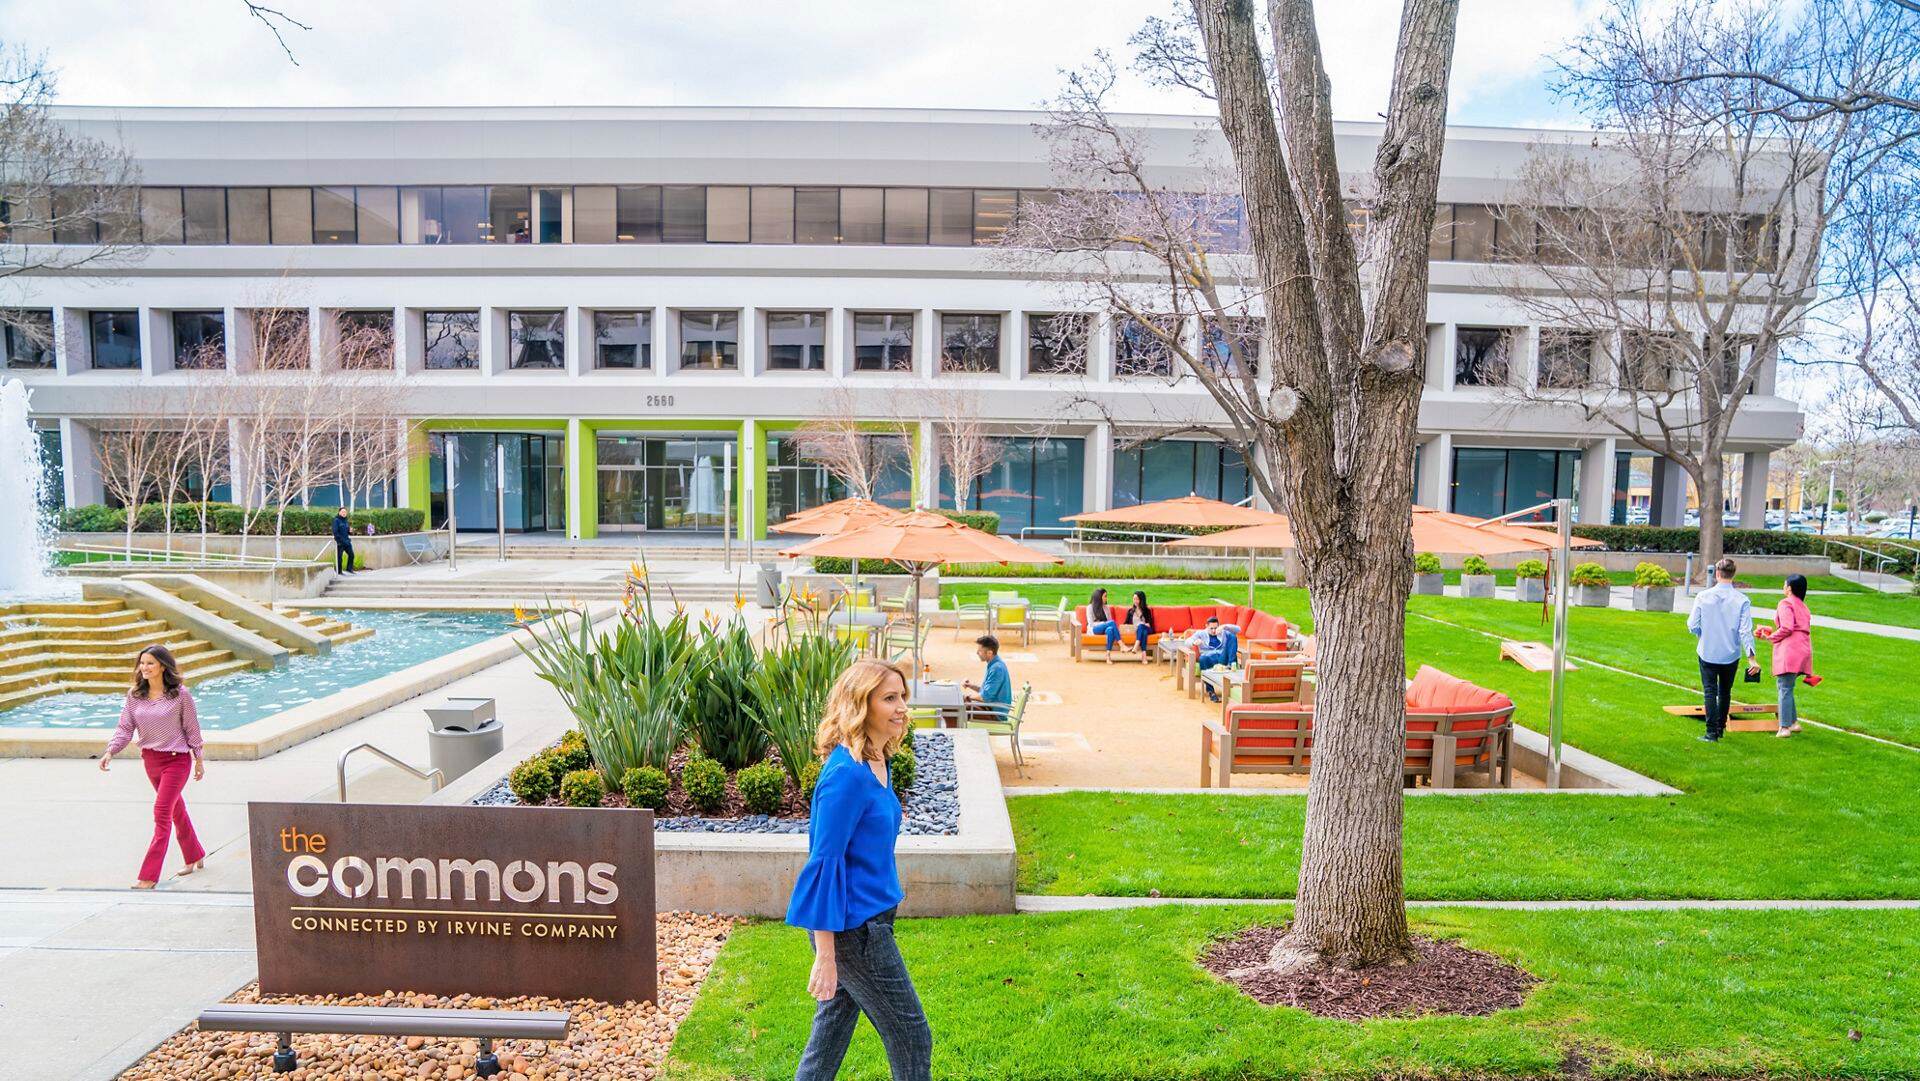 The Commons - Silicon Valley Center - 2540-2590 N. First Street  San Jose, CA 95131